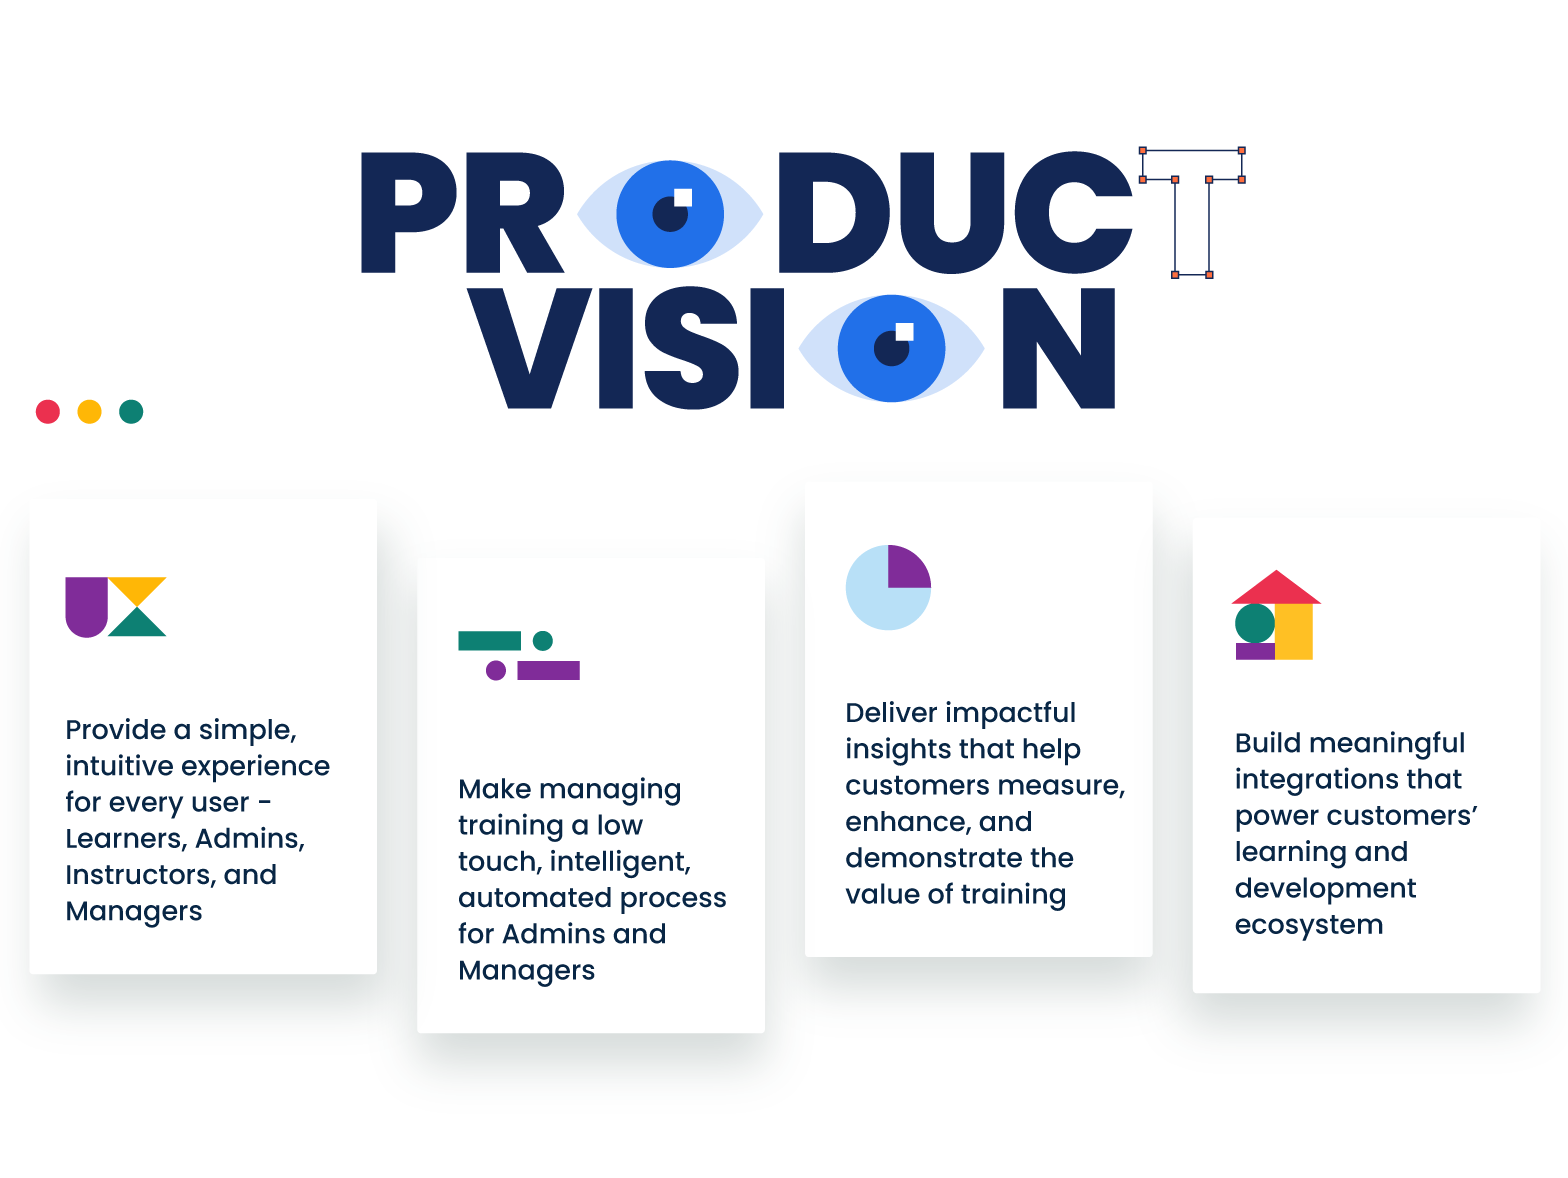 Blog: LearnUpon Product Vision 2021